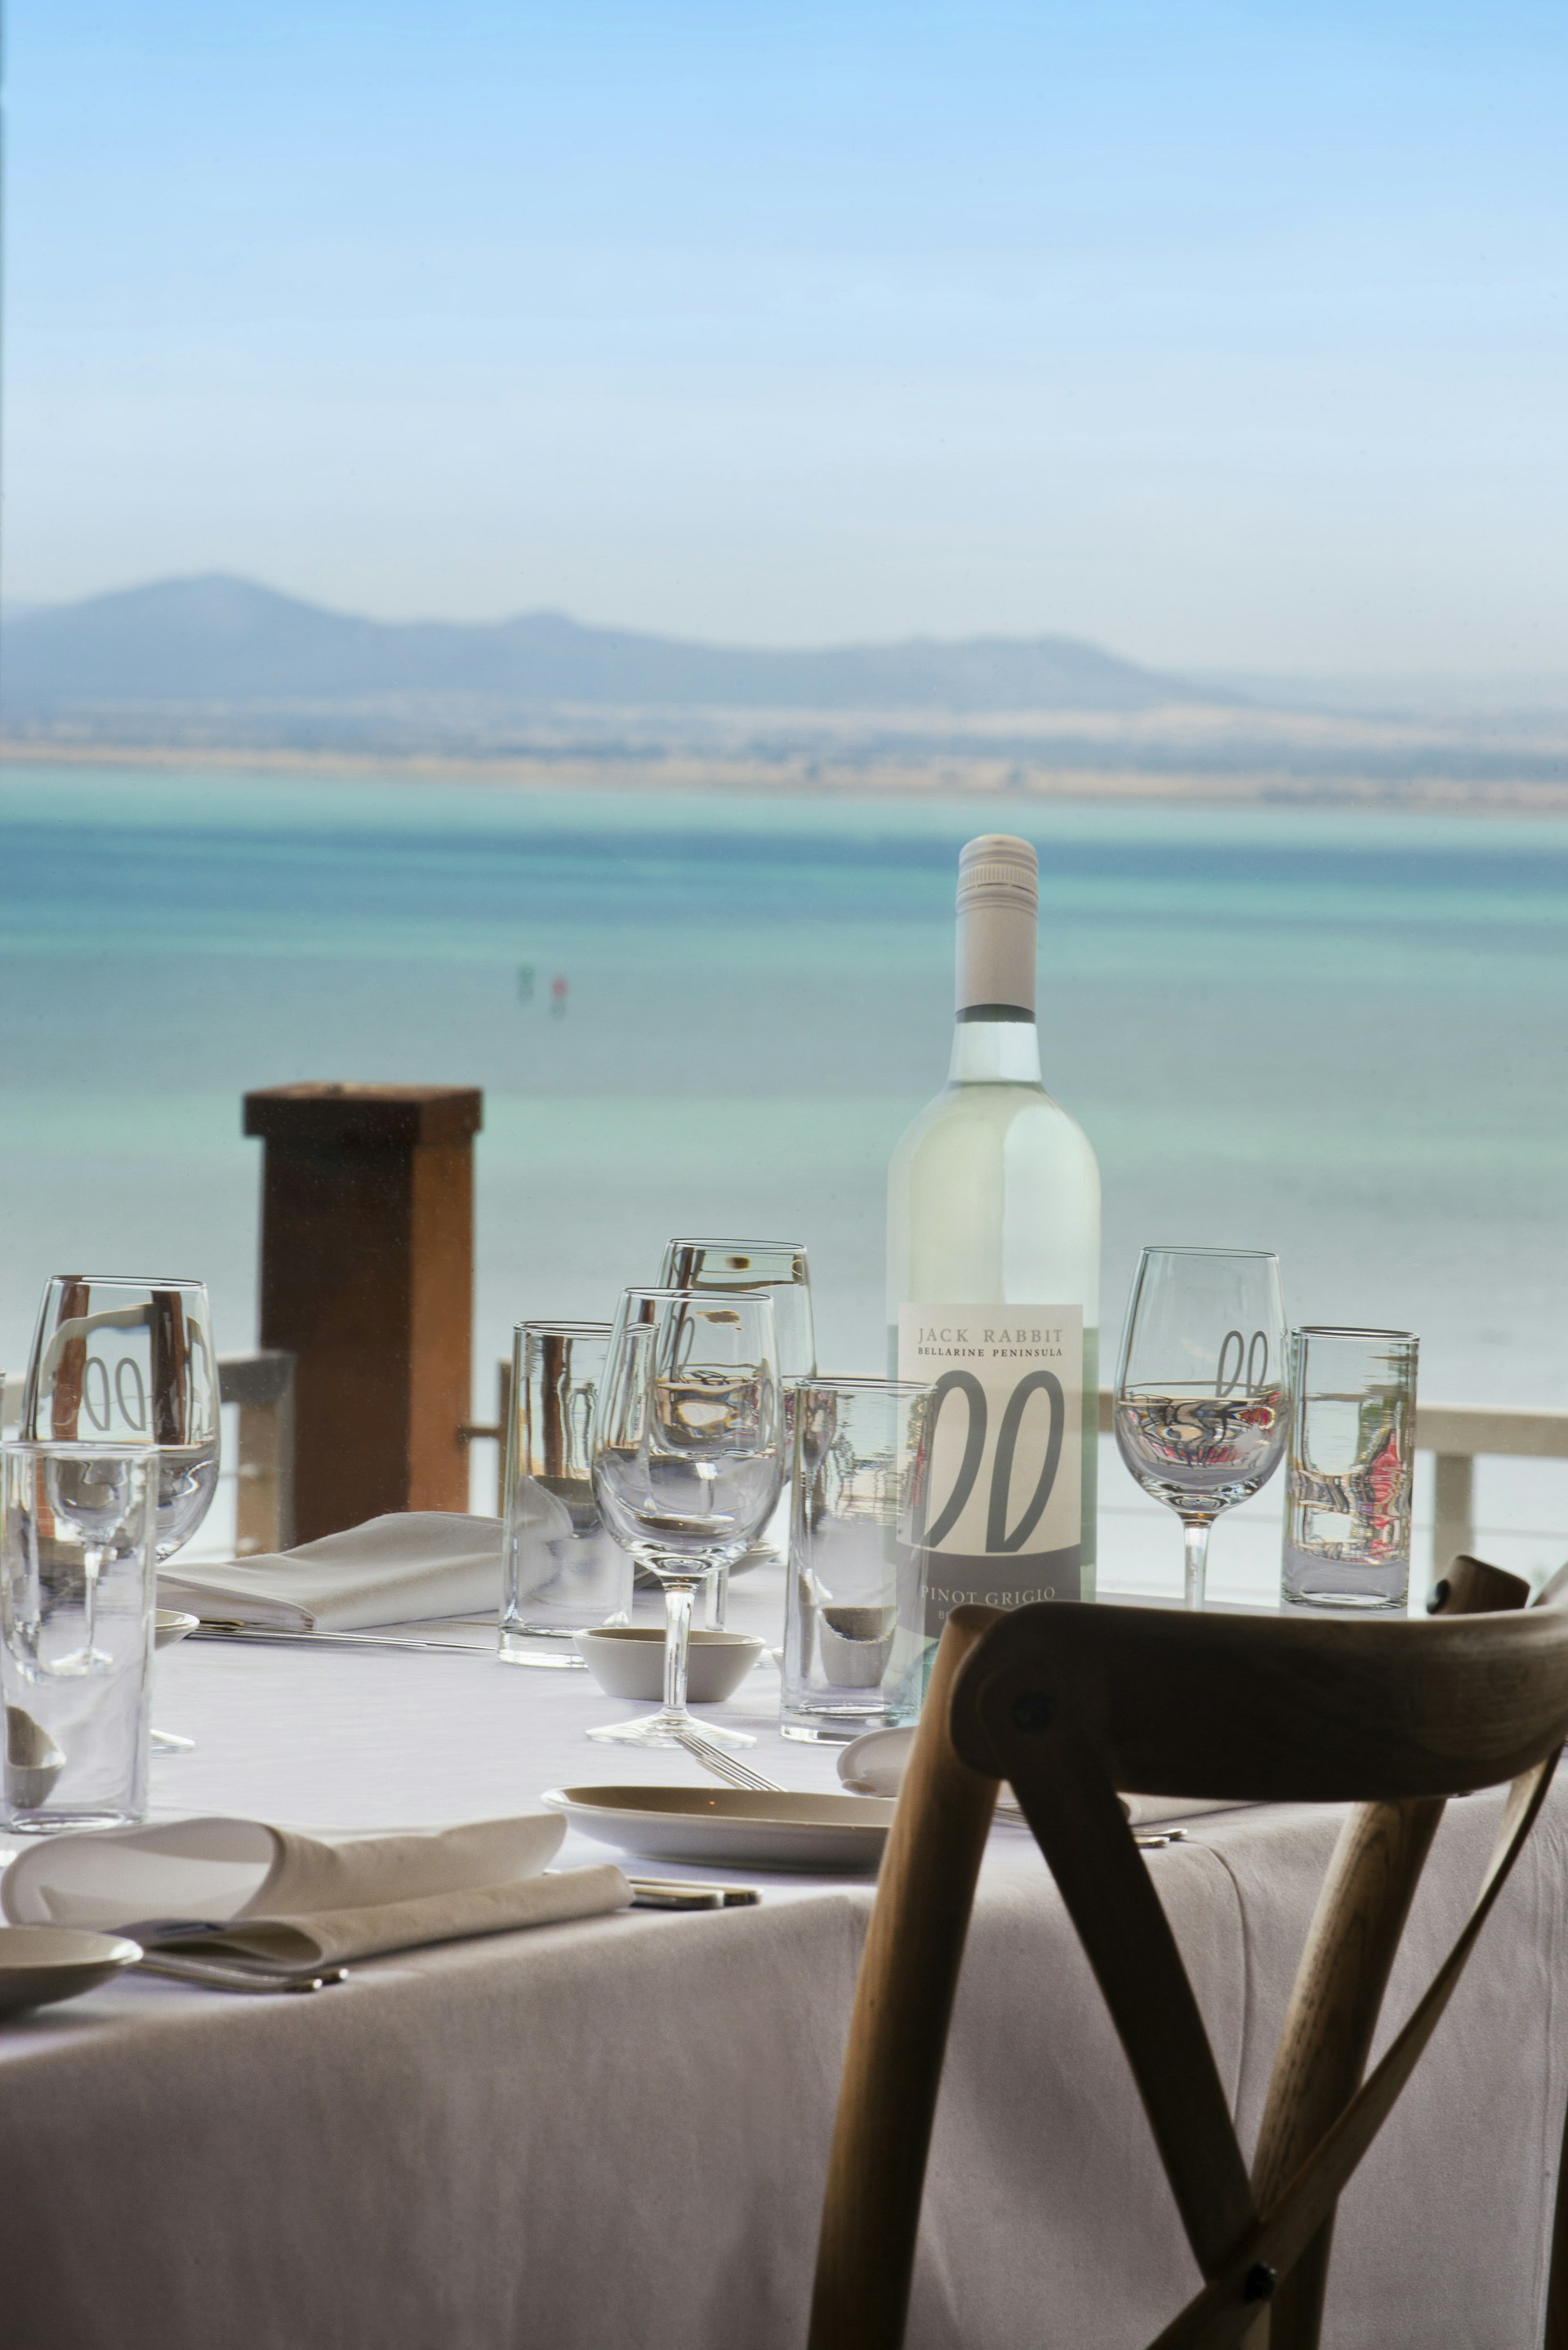 Enjoy big views over Corio Bay with your glass of © Jack Rabbit 